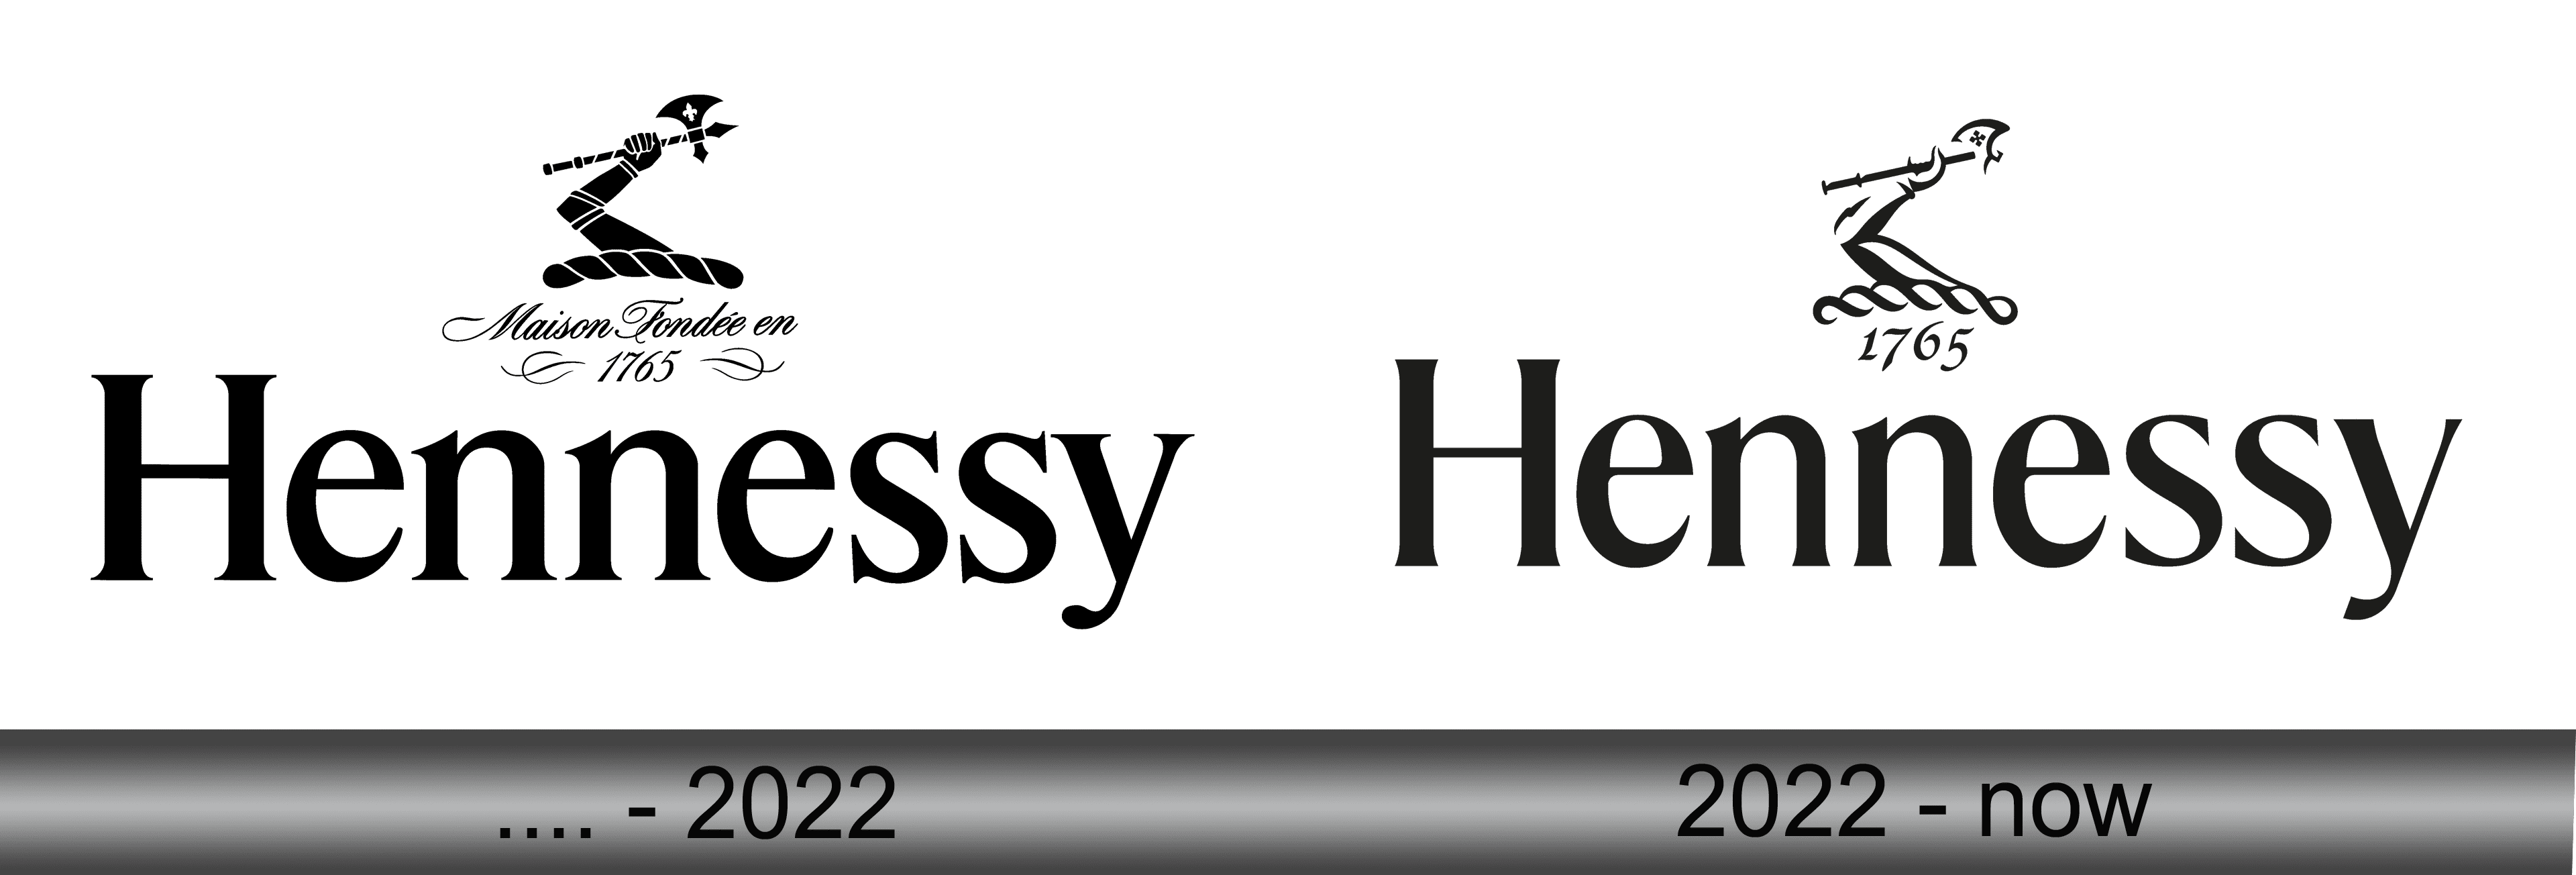 Hennessy Logo Download In Svg Vector Format Or In Png Format